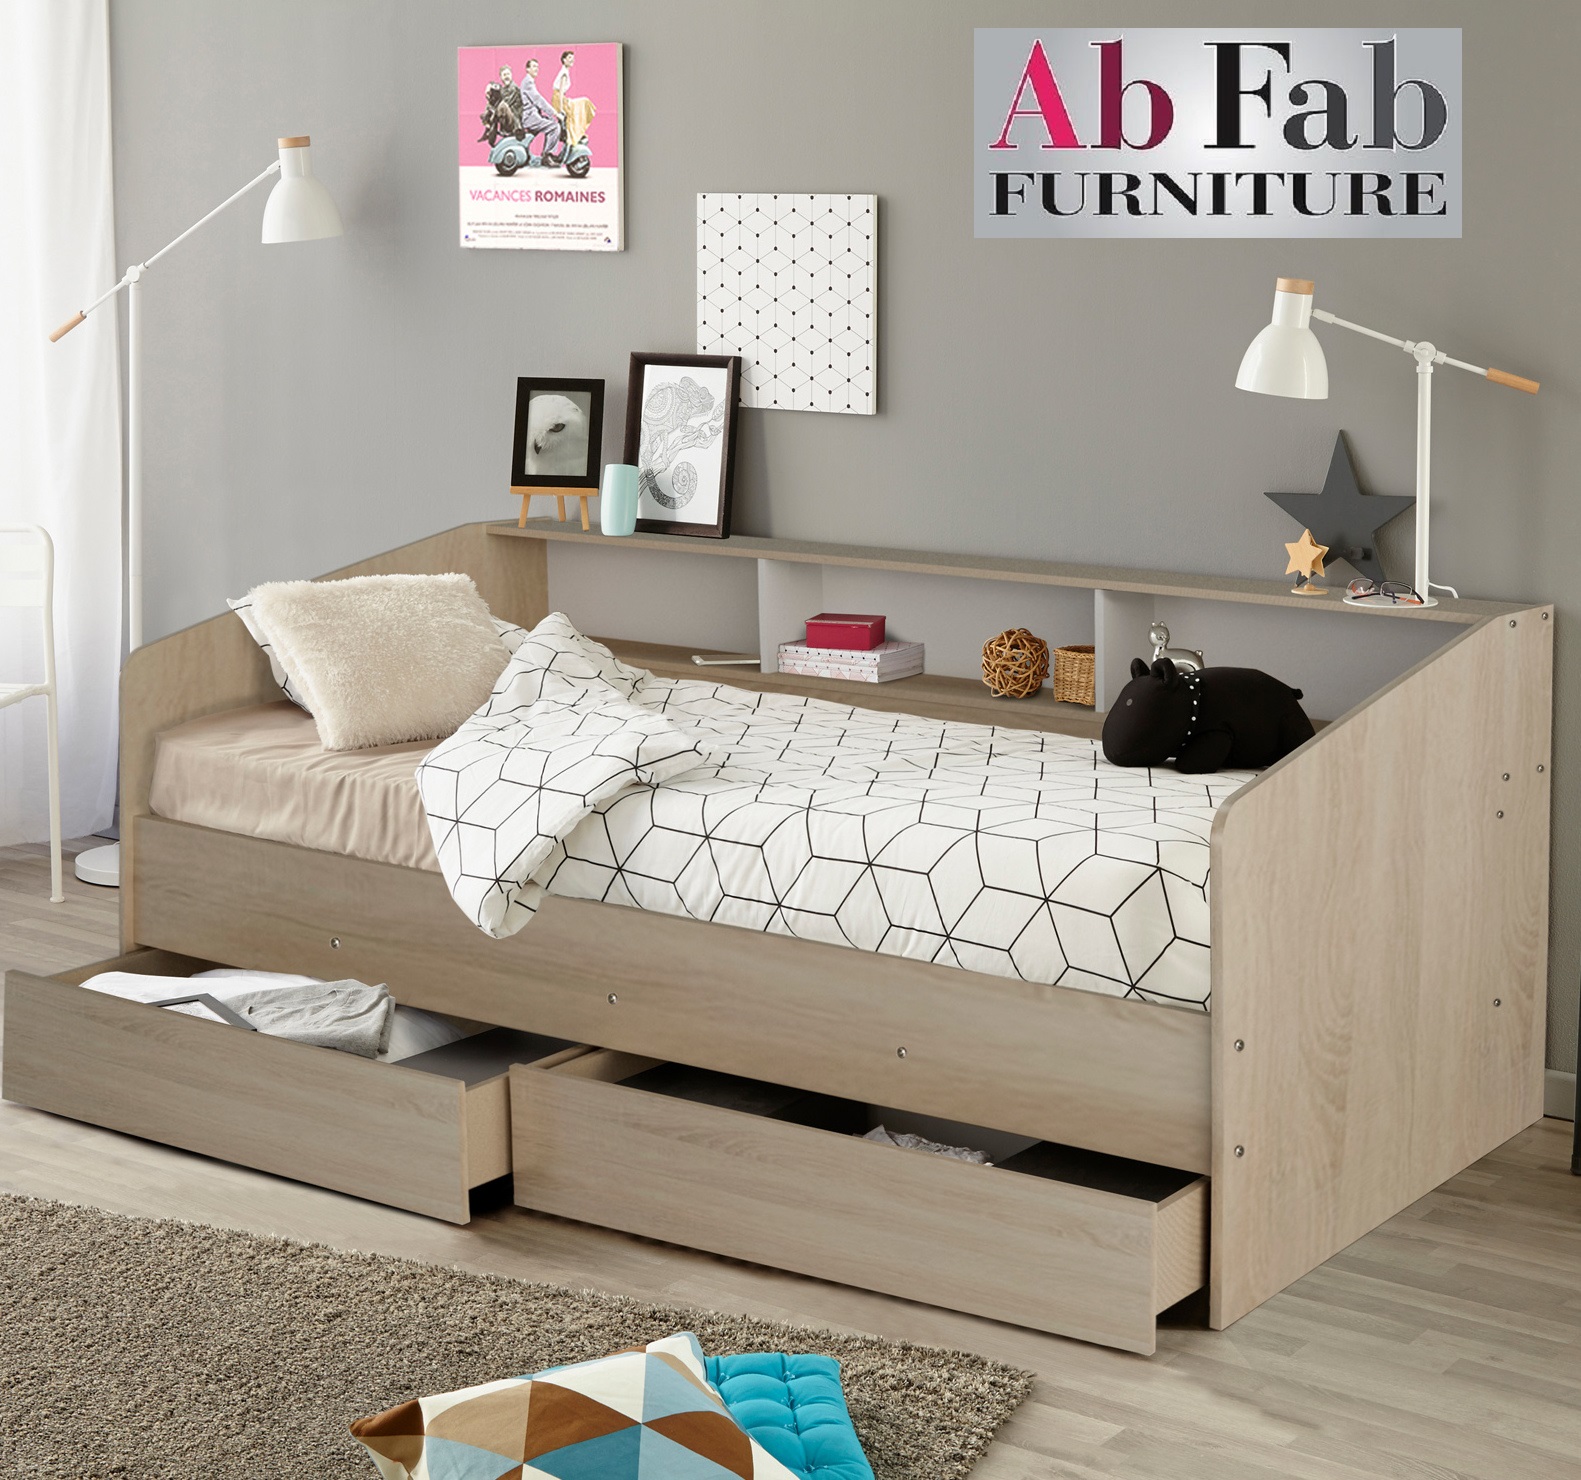 A SINGLE DAY BED BED FRAME – COZY STORAGE SOLUTION WITH DRAWERS IN